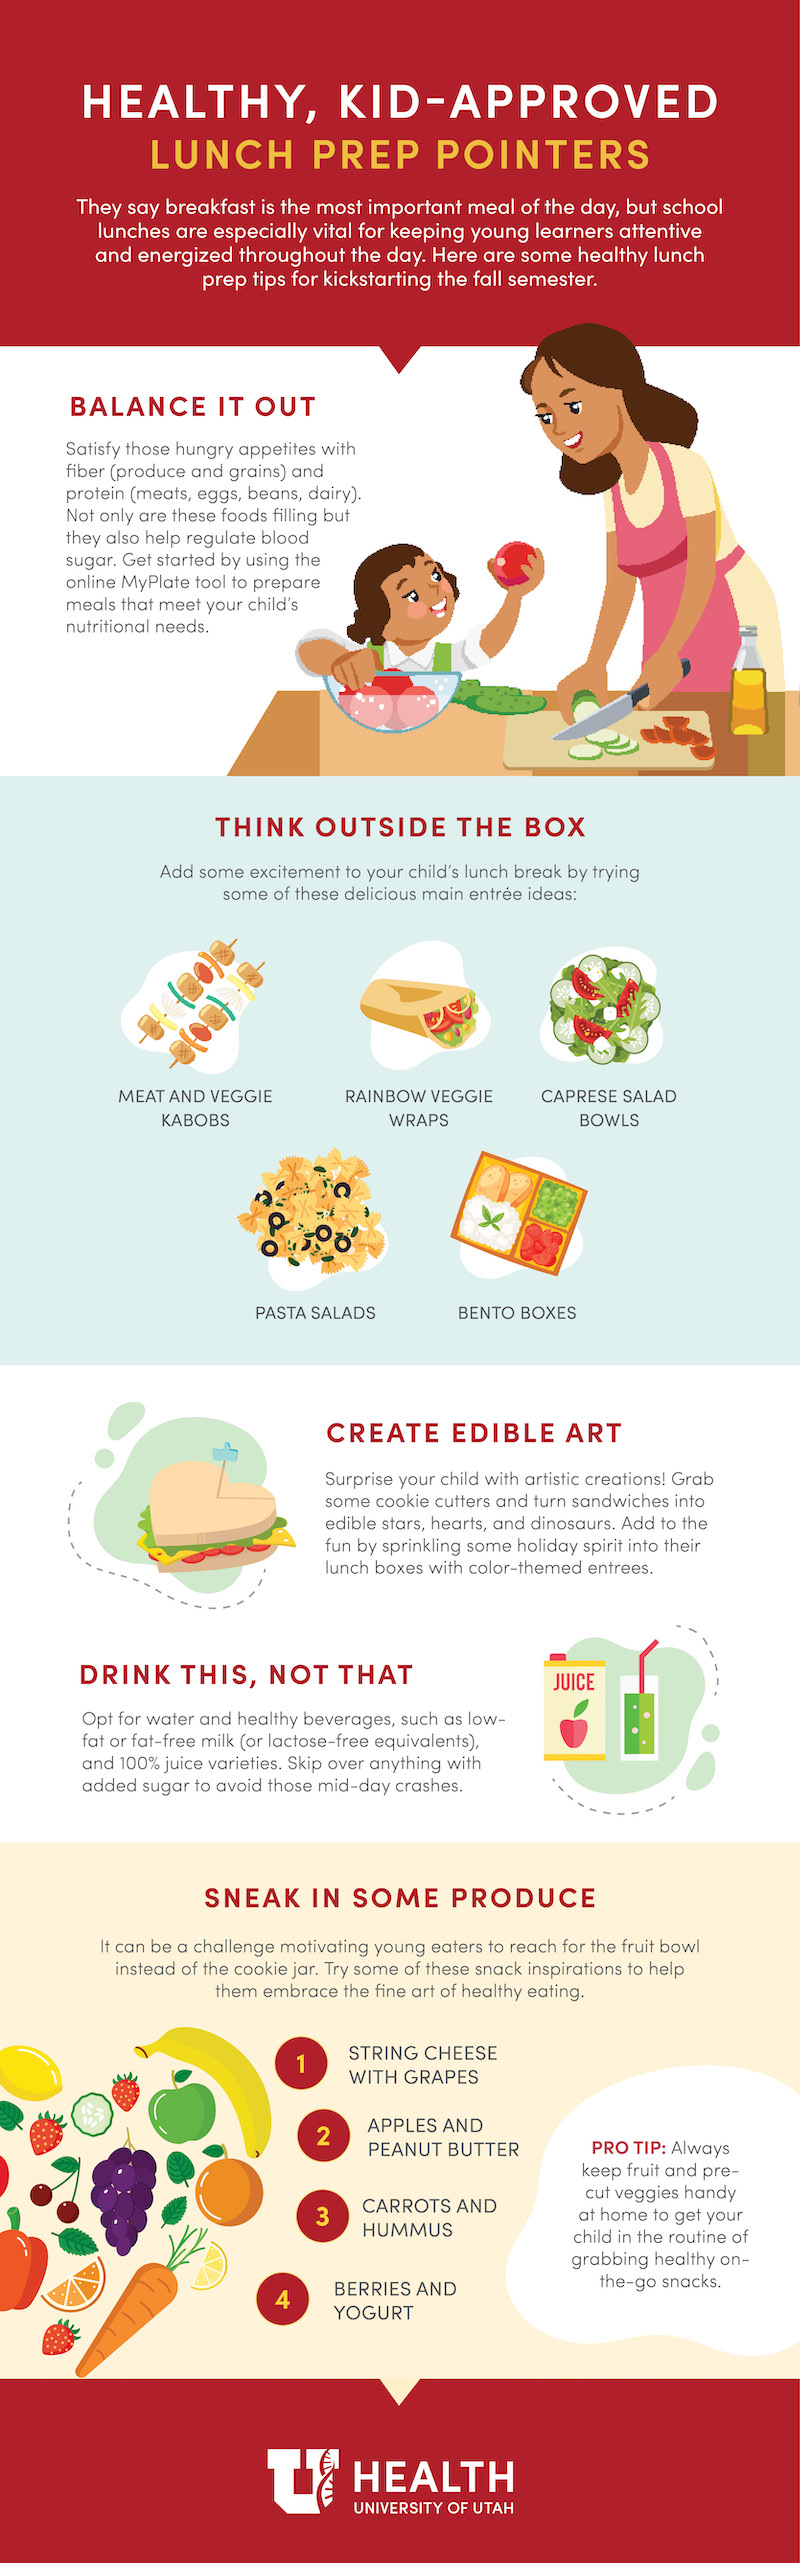 Infographic provides tips for making healthy lunches for kids.